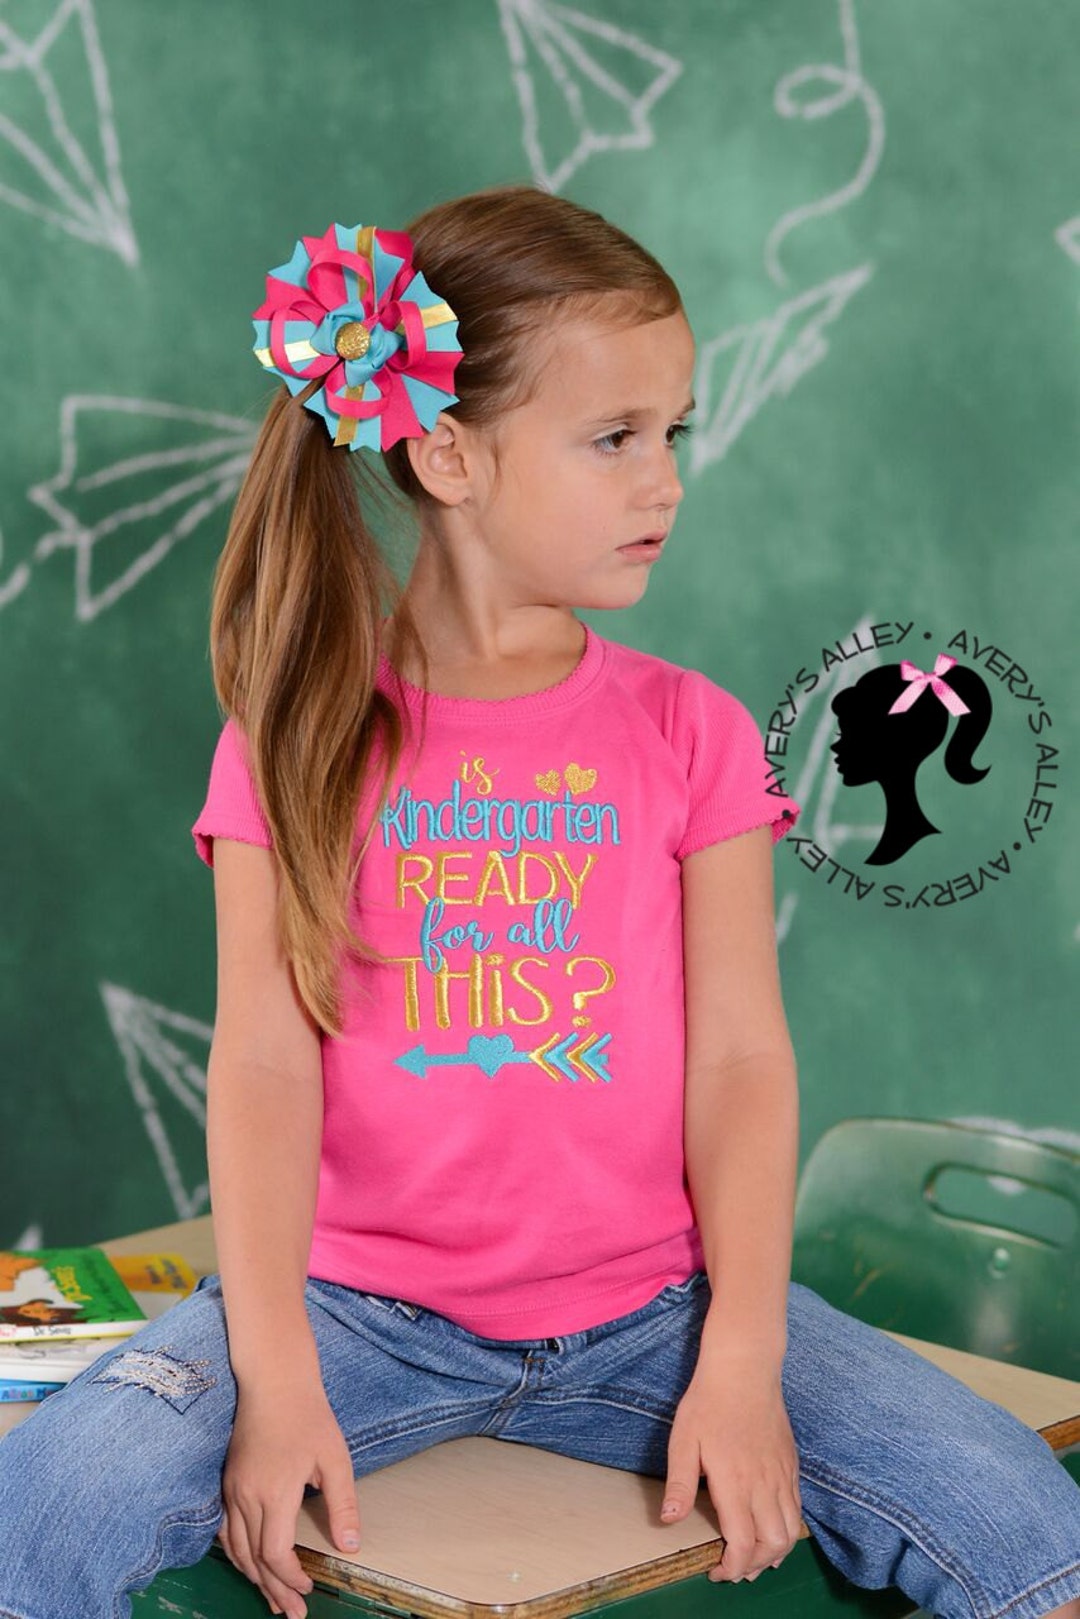 ANY GRADE is Kindergarten Ready for All This Girls - Etsy